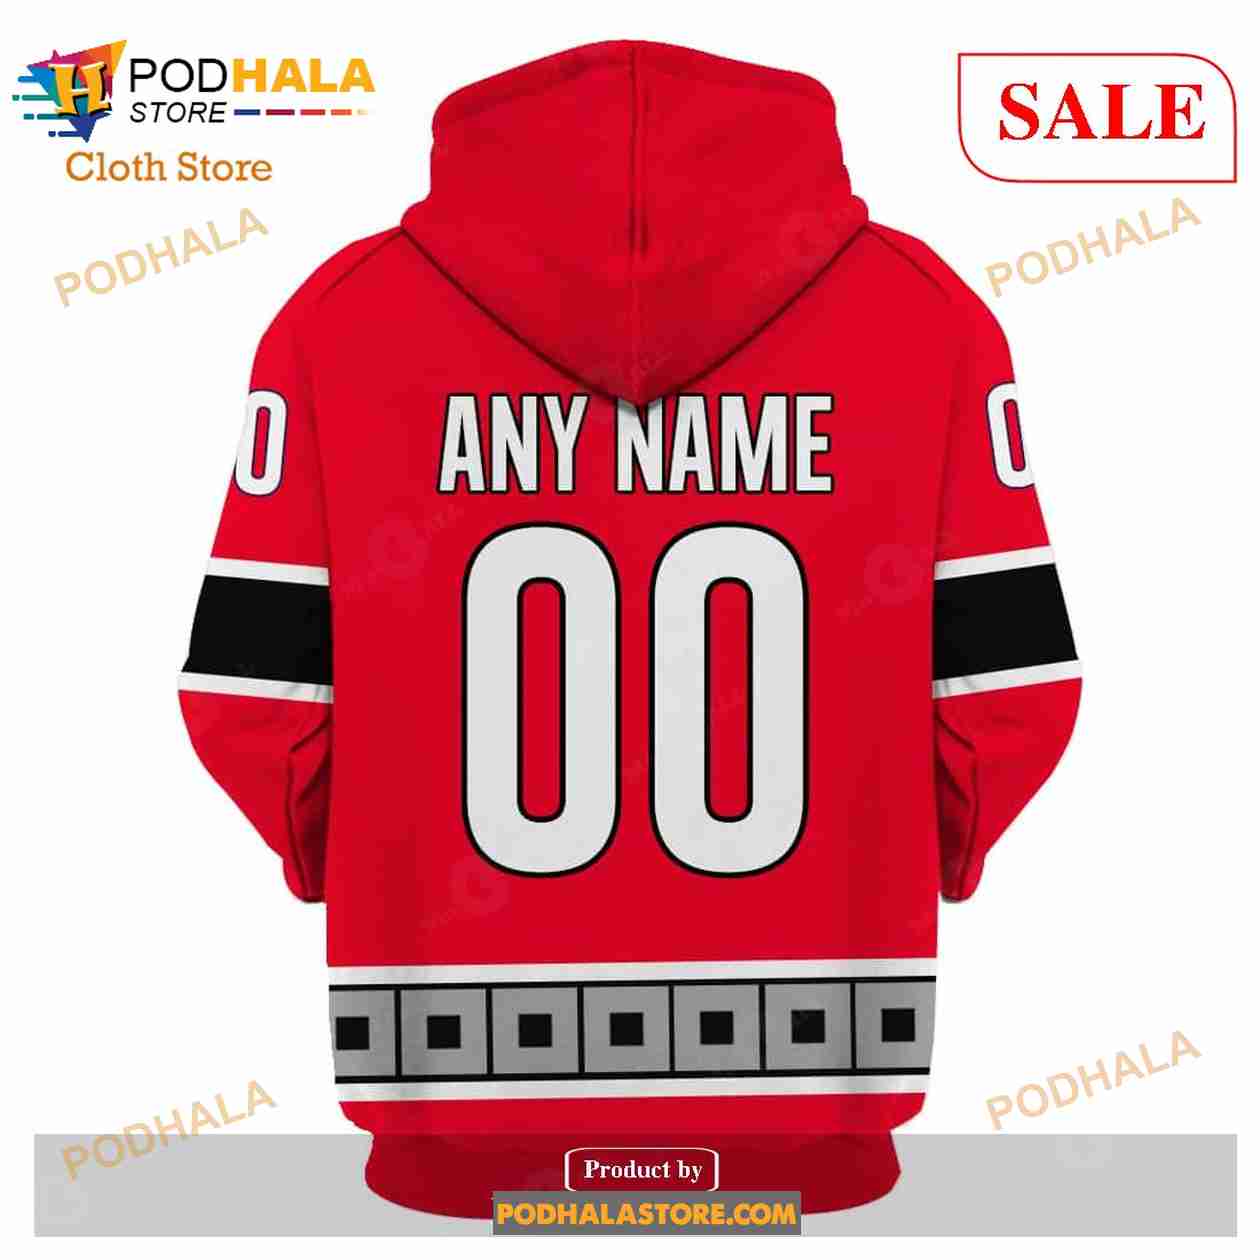 Personalized NHL Montreal Canadiens Autism Awareness 3D Hoodie